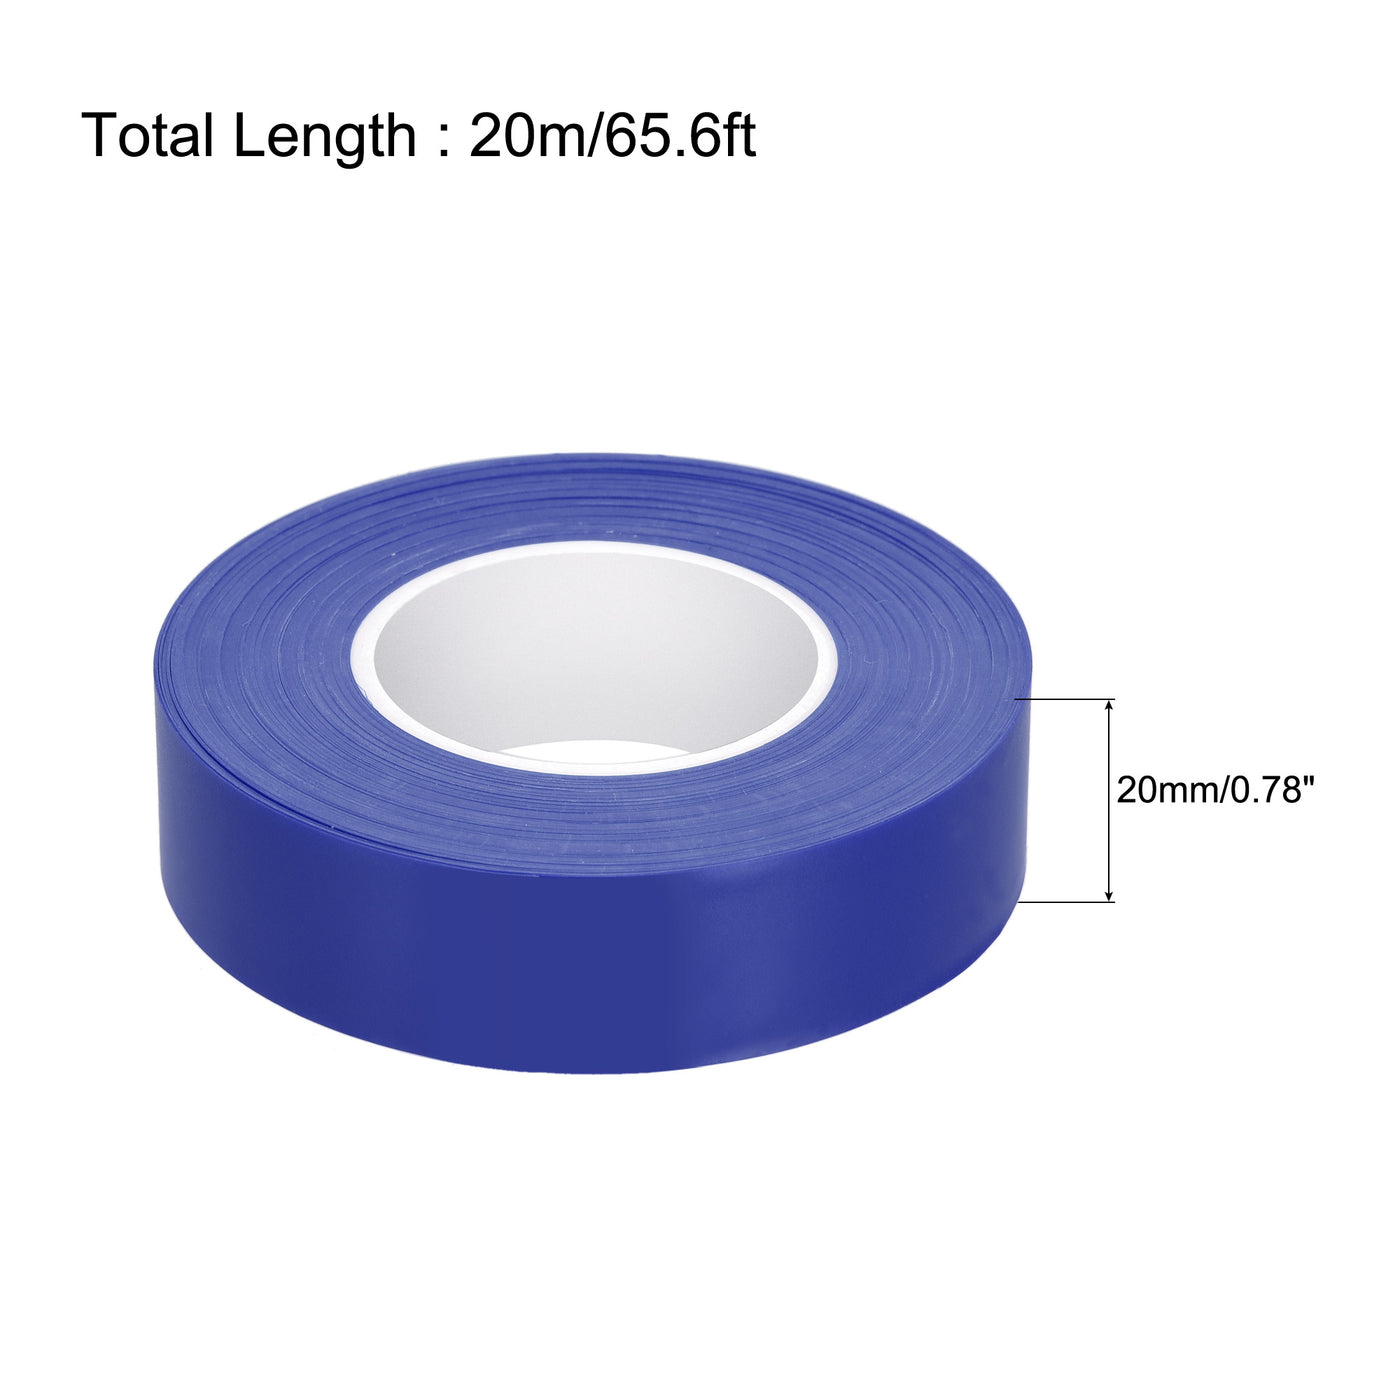 uxcell Uxcell PVC Flagging Tape 20mm x 20m/65.6ft Marking Tape Non-Adhesive Blue